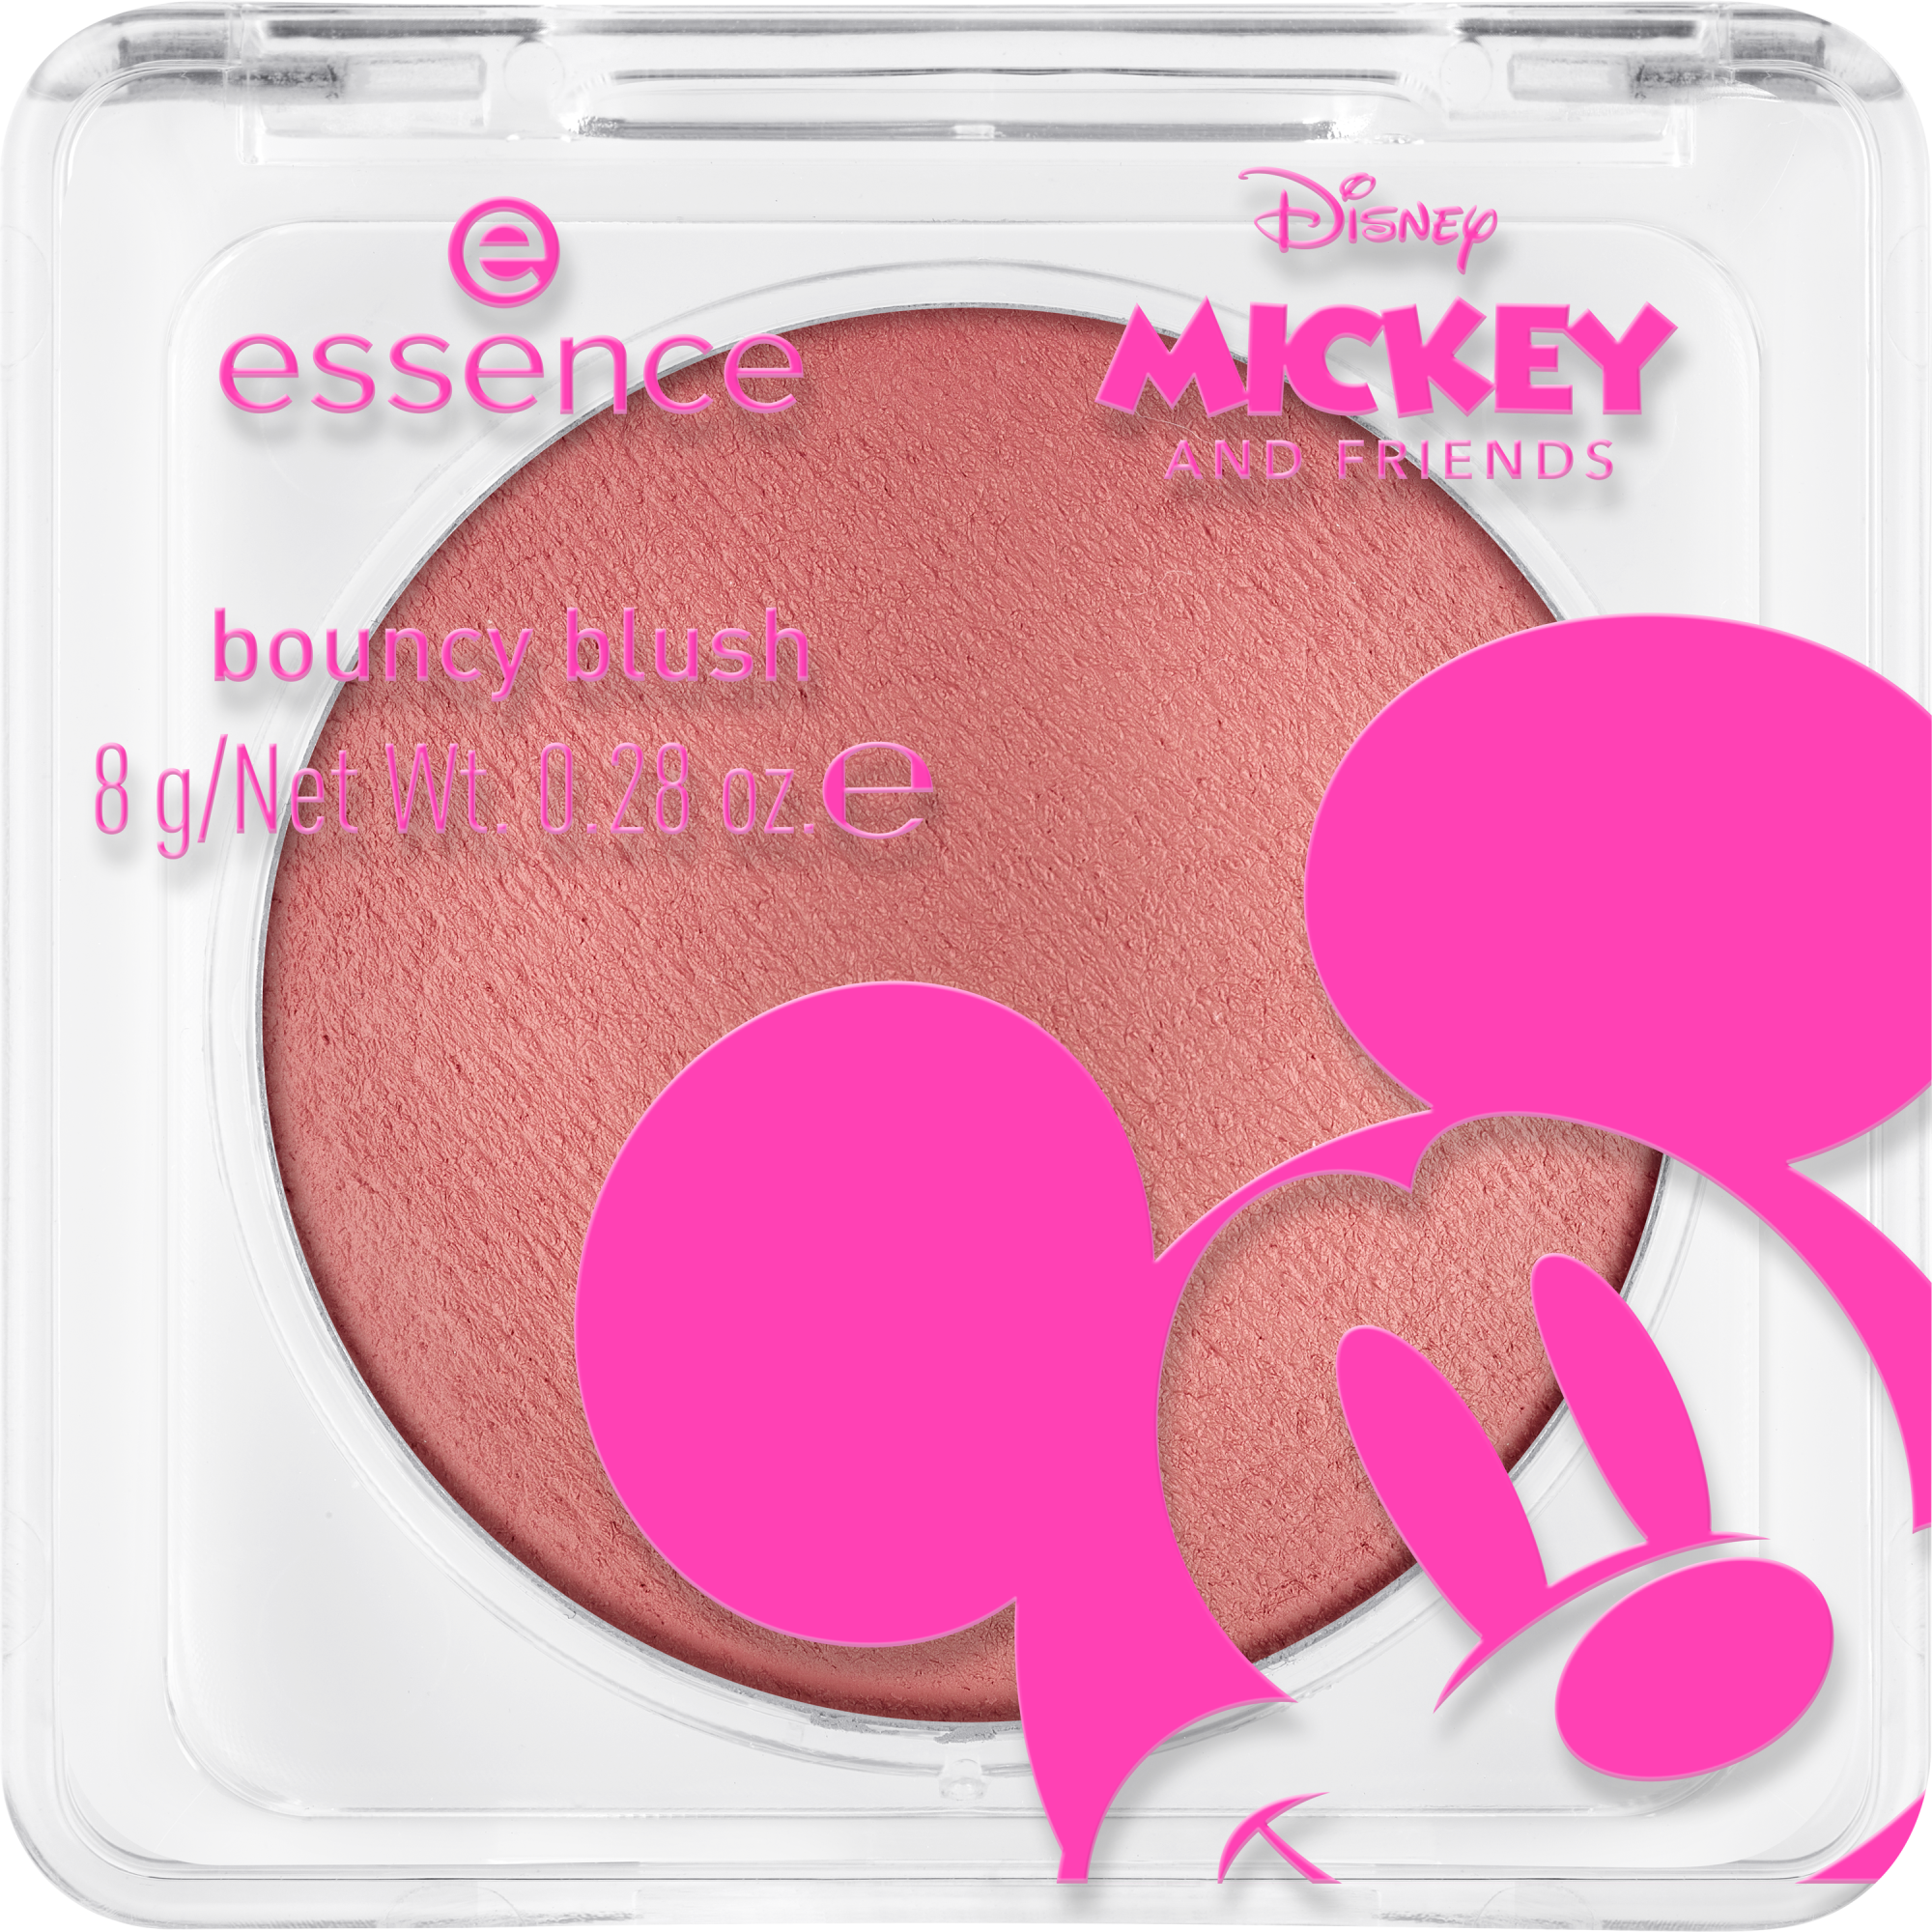 Blush vivace Disney Mickey and Friends